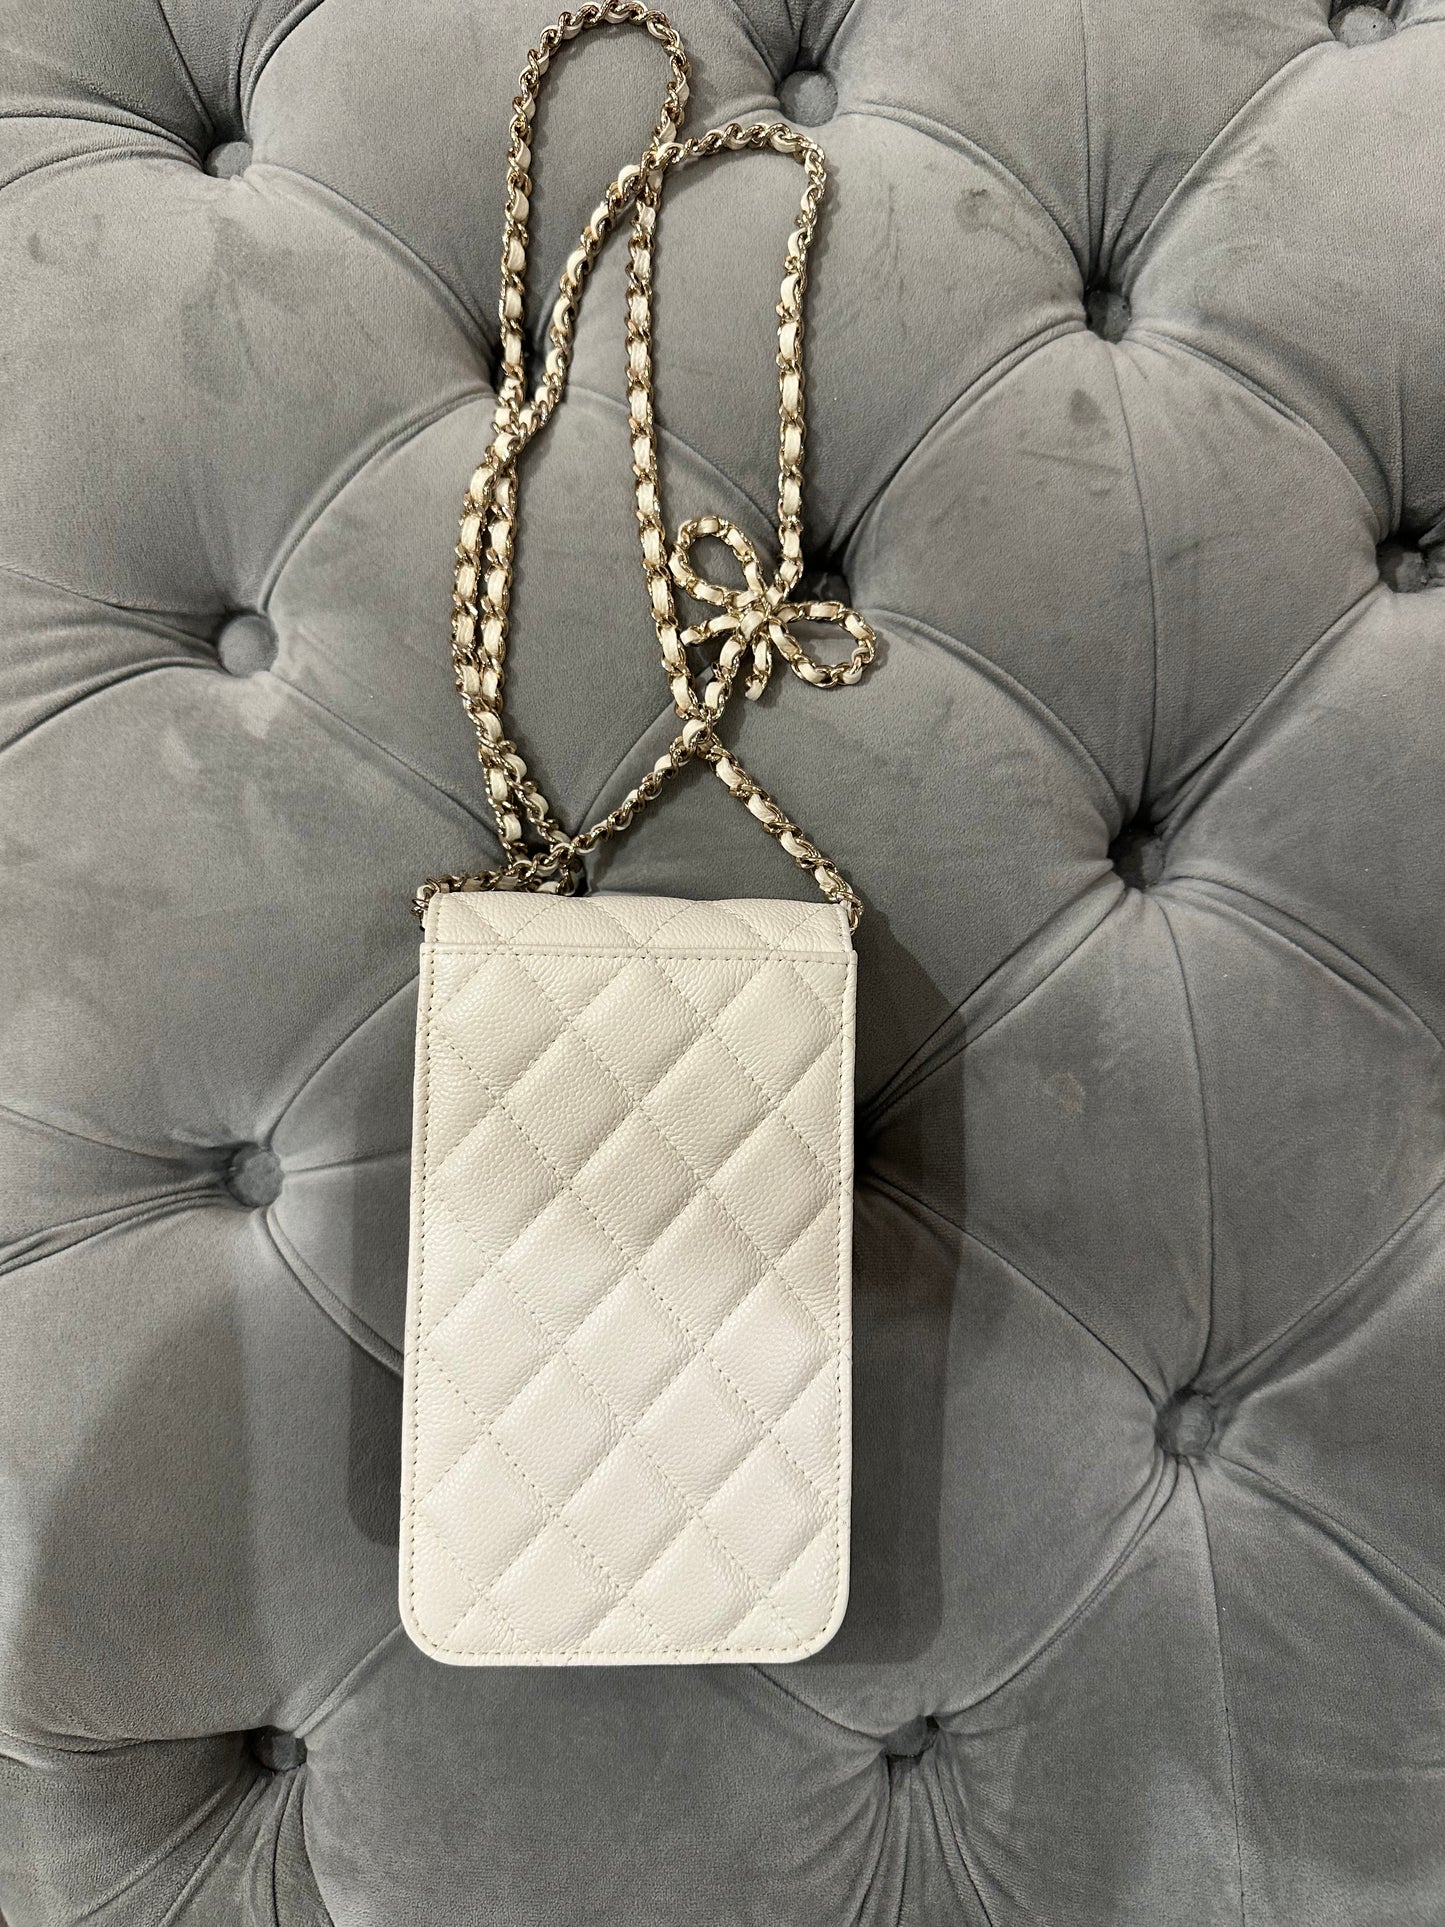 CHANEL
Caviar Quilted Classic Phone Bag